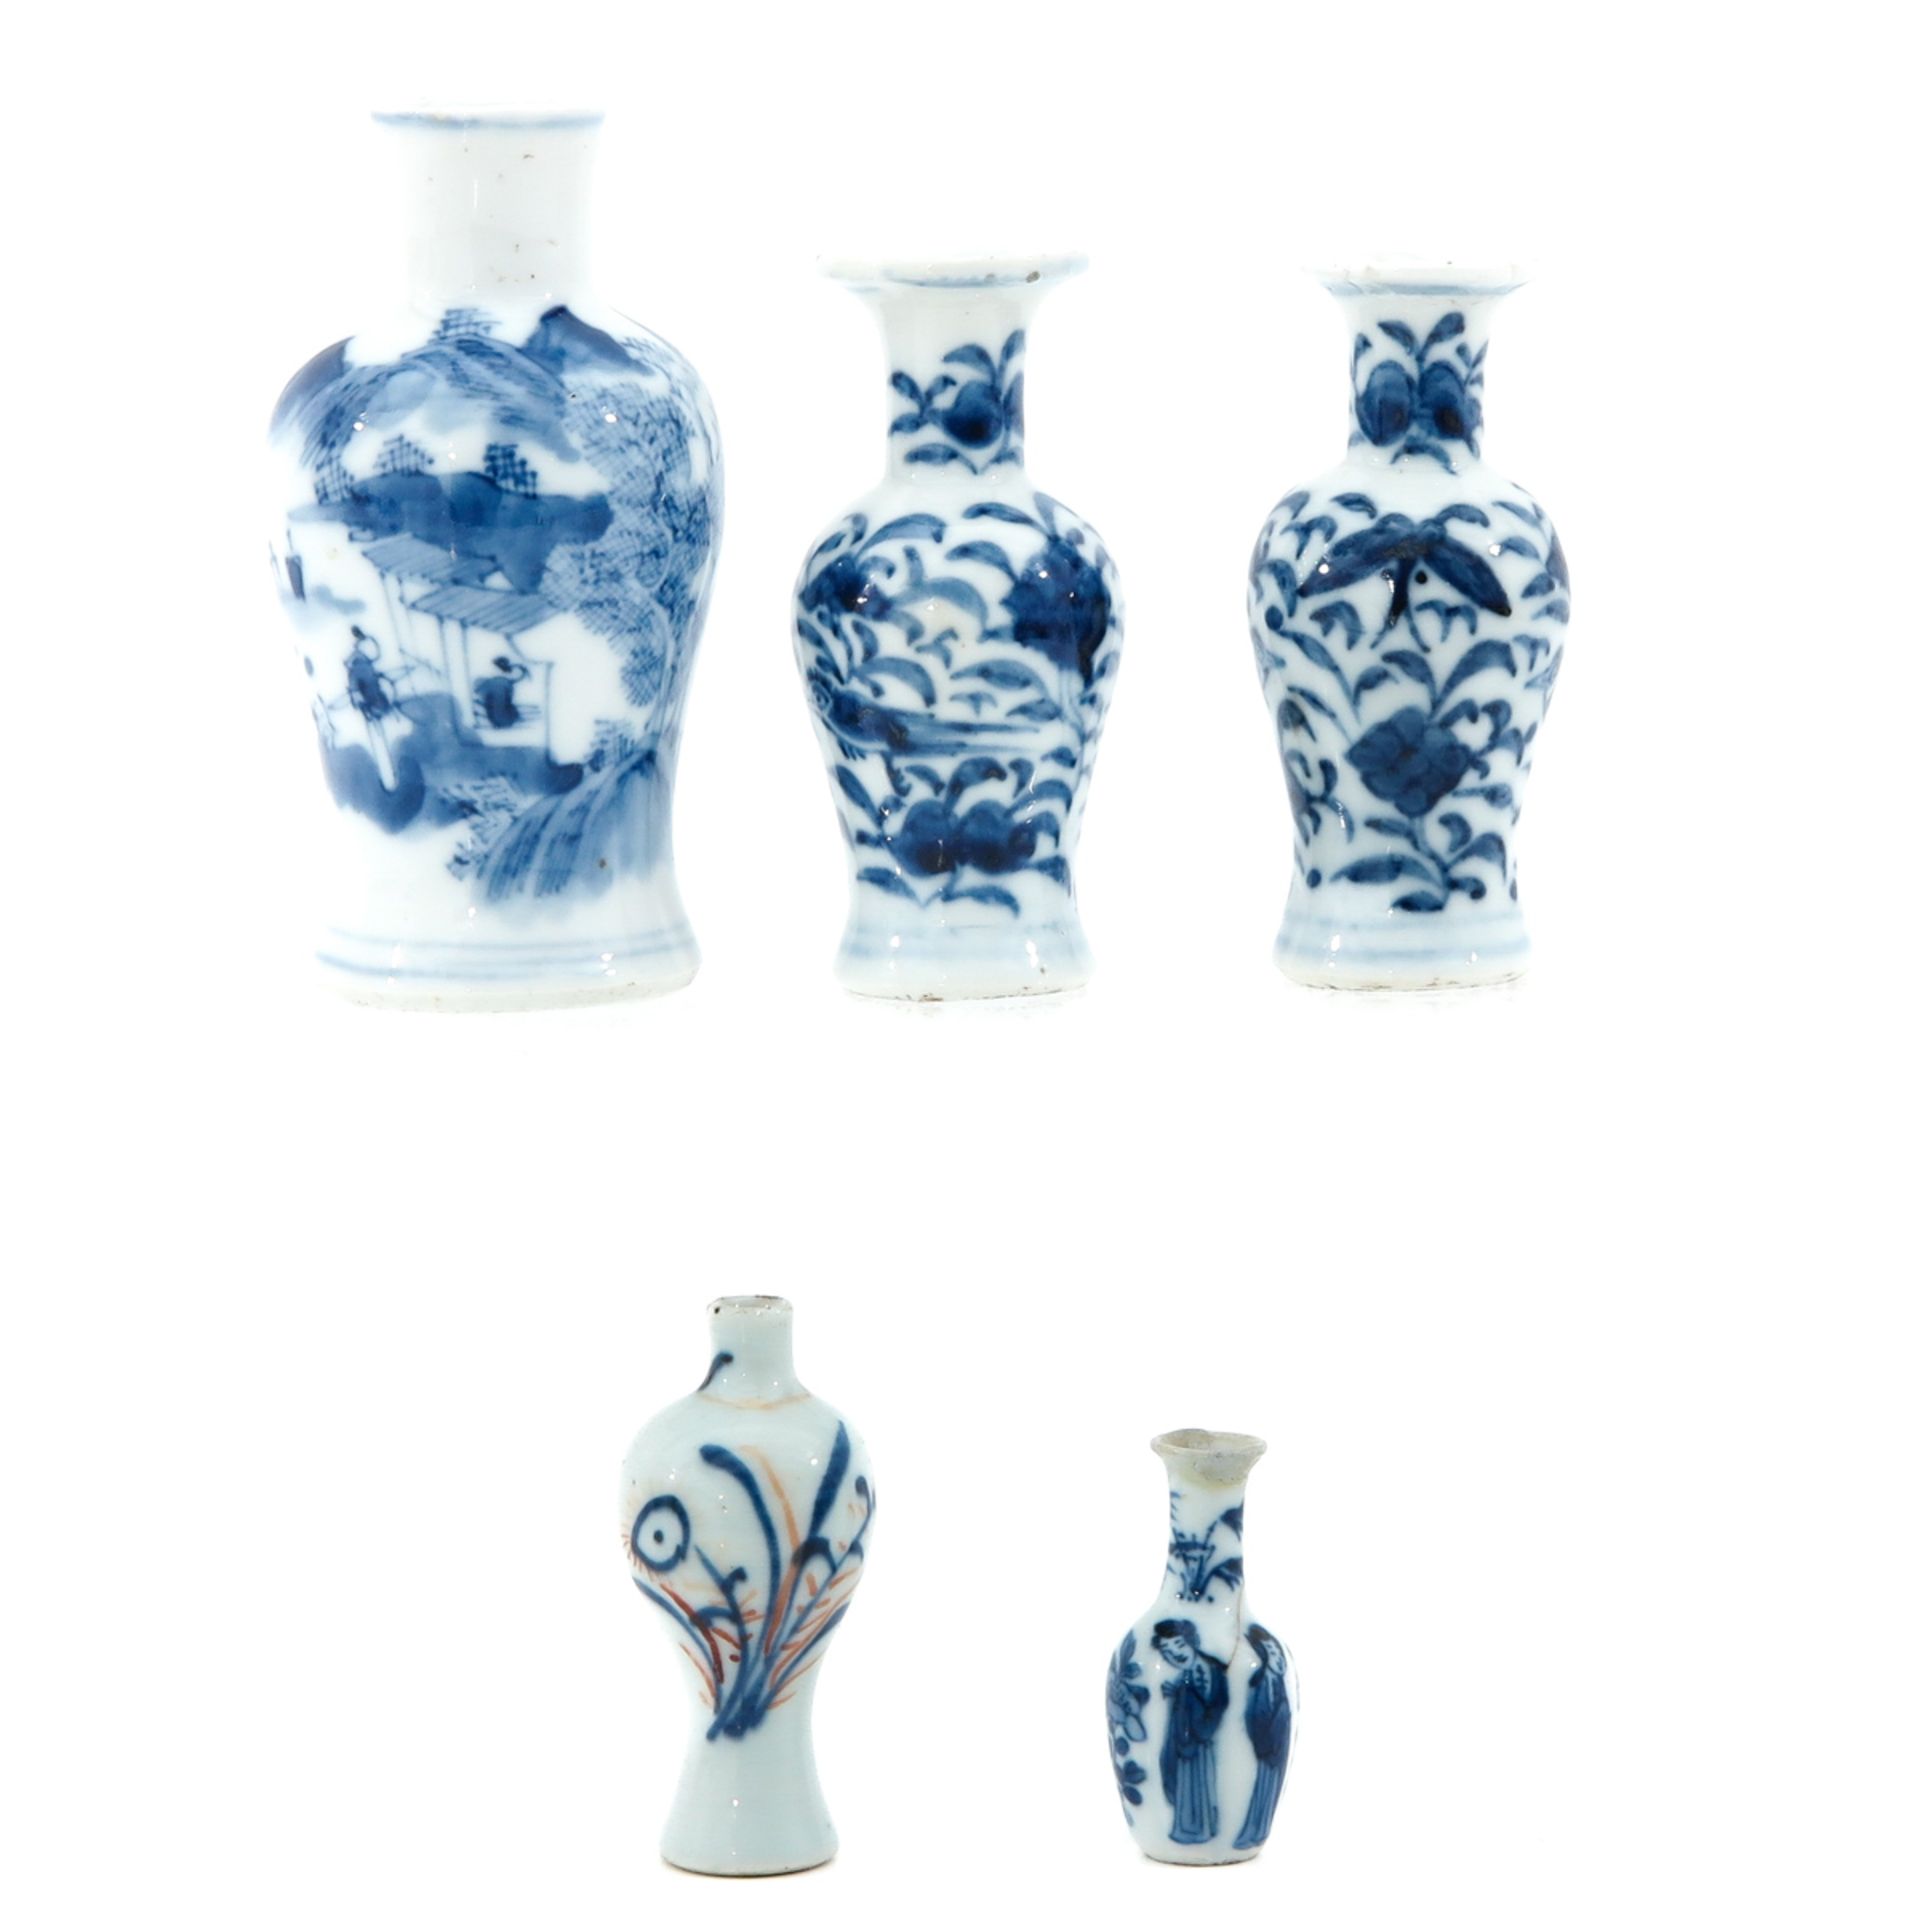 A Collection of 5 Miniature Vases